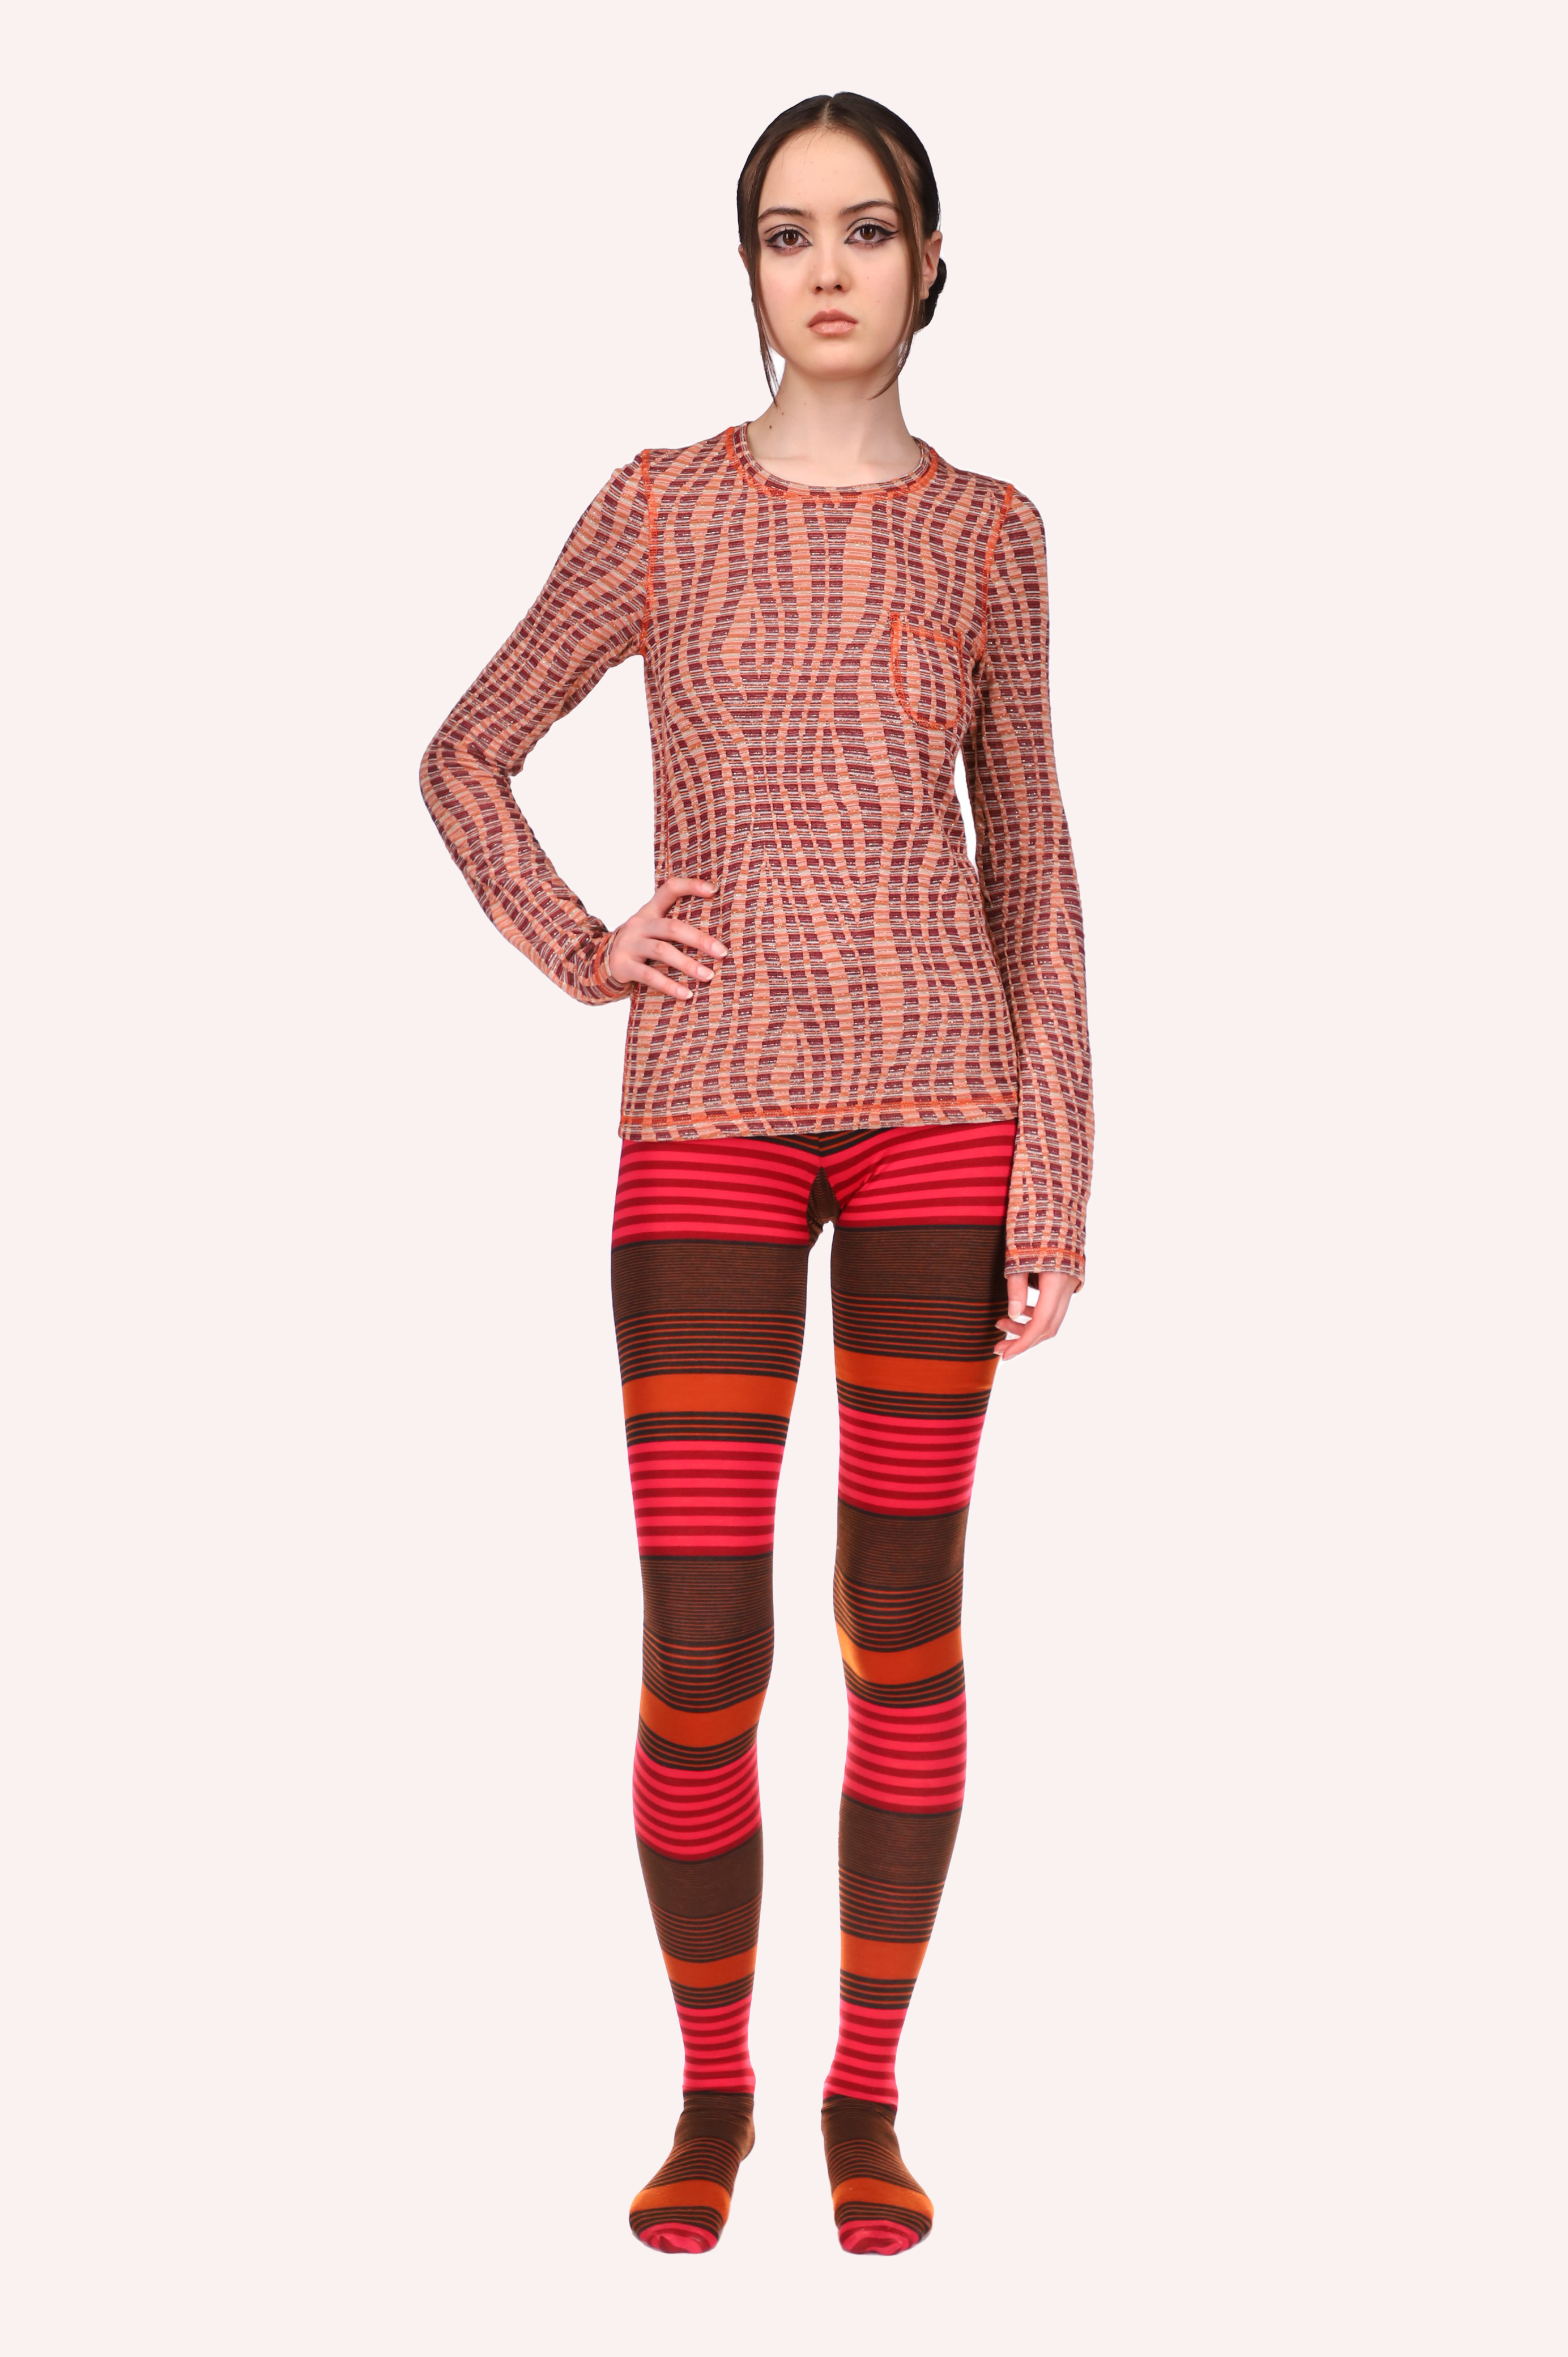 Mod Stripe Knit Tights Orange , the design of these tights shapes and slims the legs.